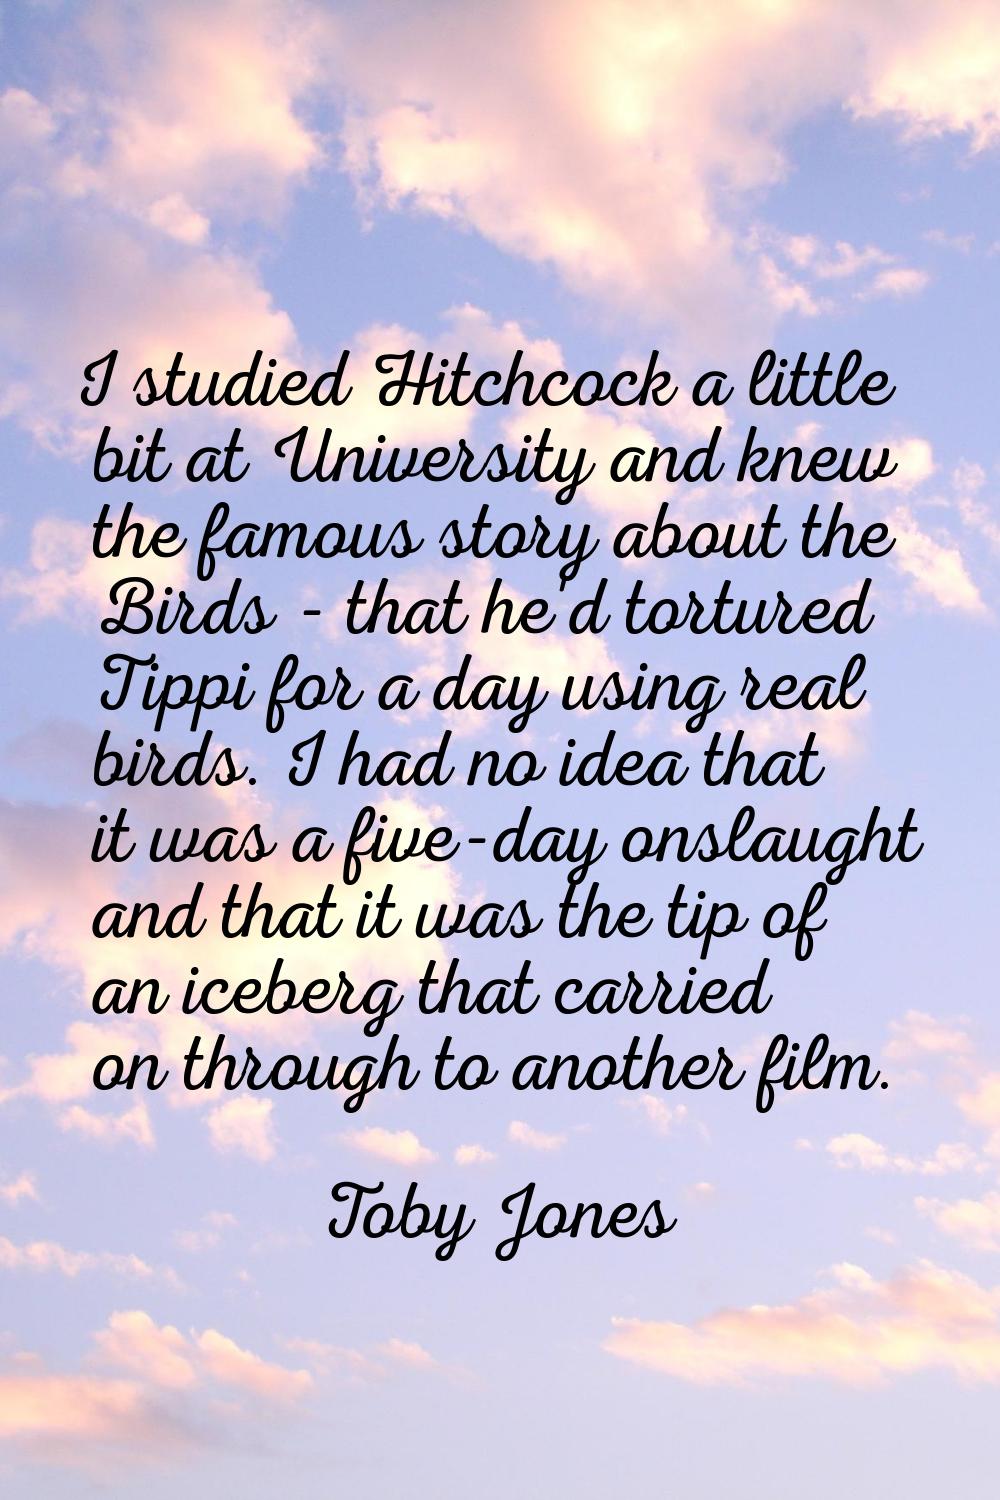 I studied Hitchcock a little bit at University and knew the famous story about the Birds - that he'